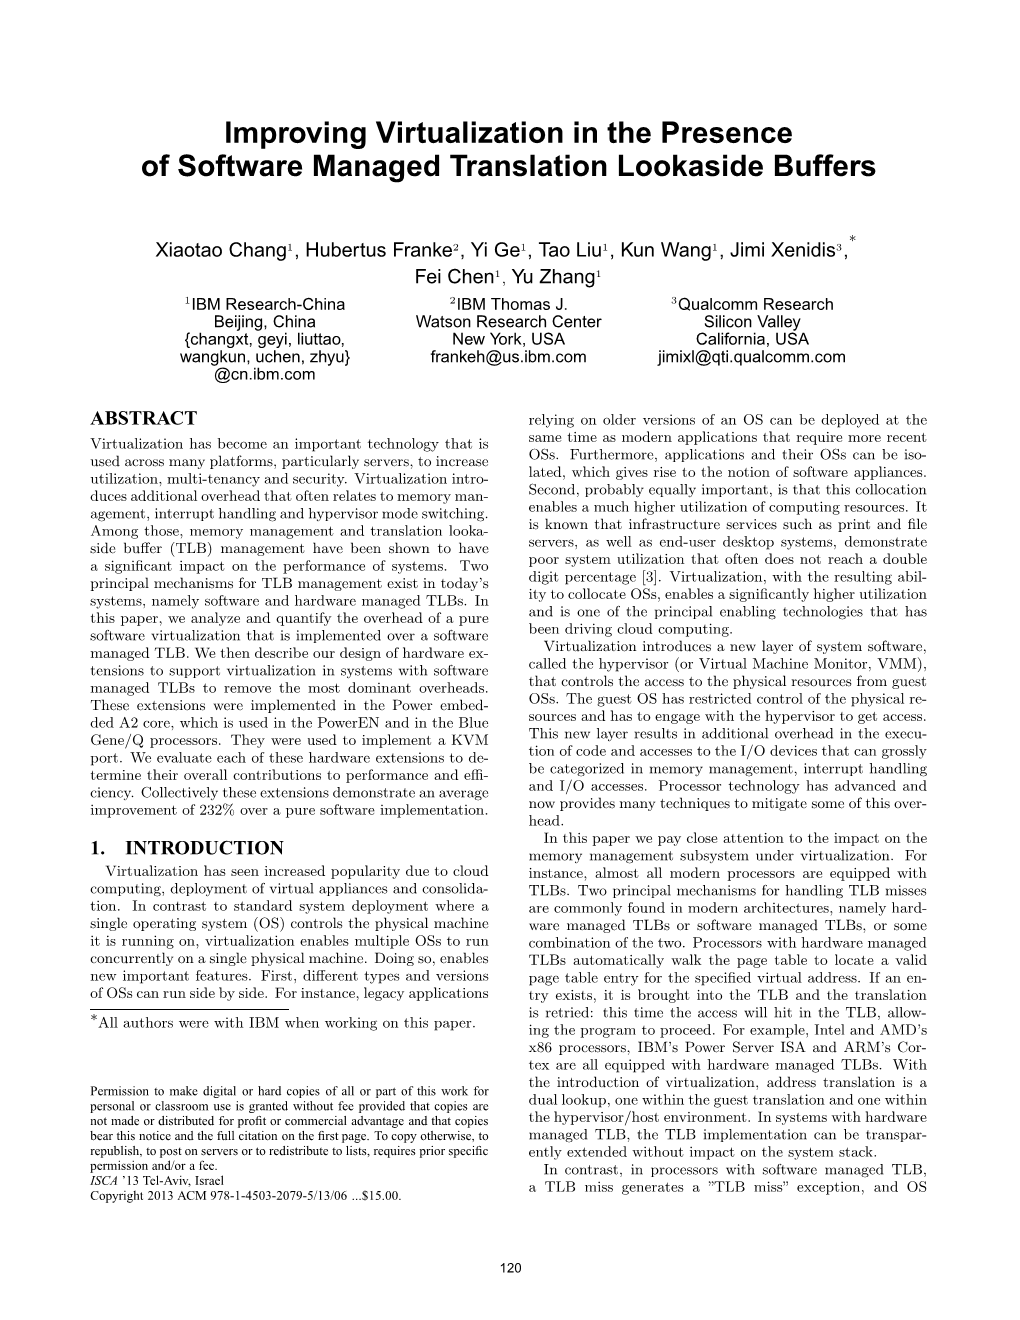 Improving Virtualization in the Presence of Software Managed Translation Lookaside Buffers